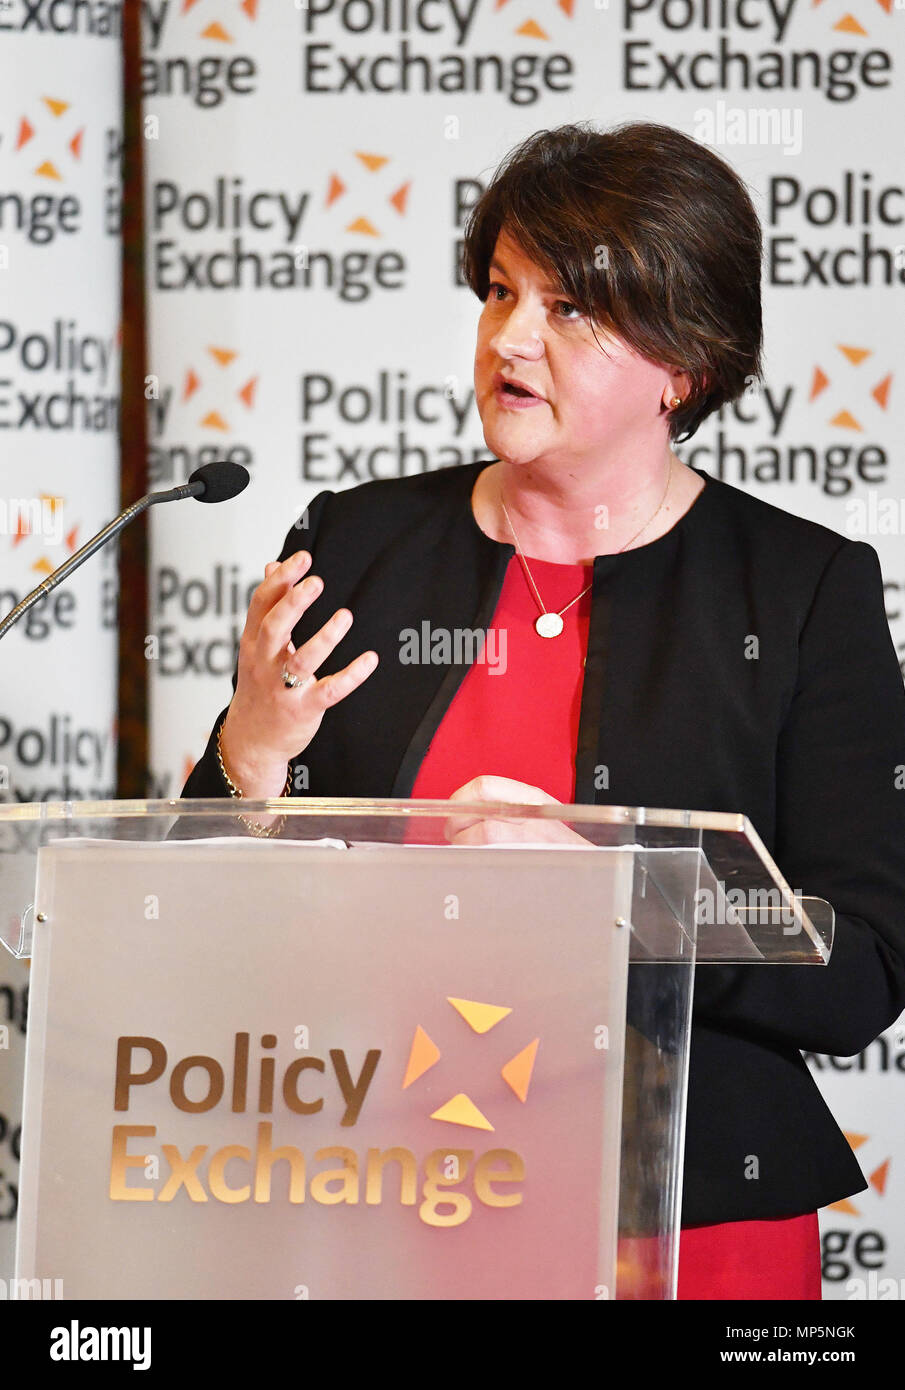 Arlene Foster former First Minister of Northern Ireland speaks at a Policy Exchange conference titled The Union and Unionism - Past, Present and Future, in central London. Stock Photo